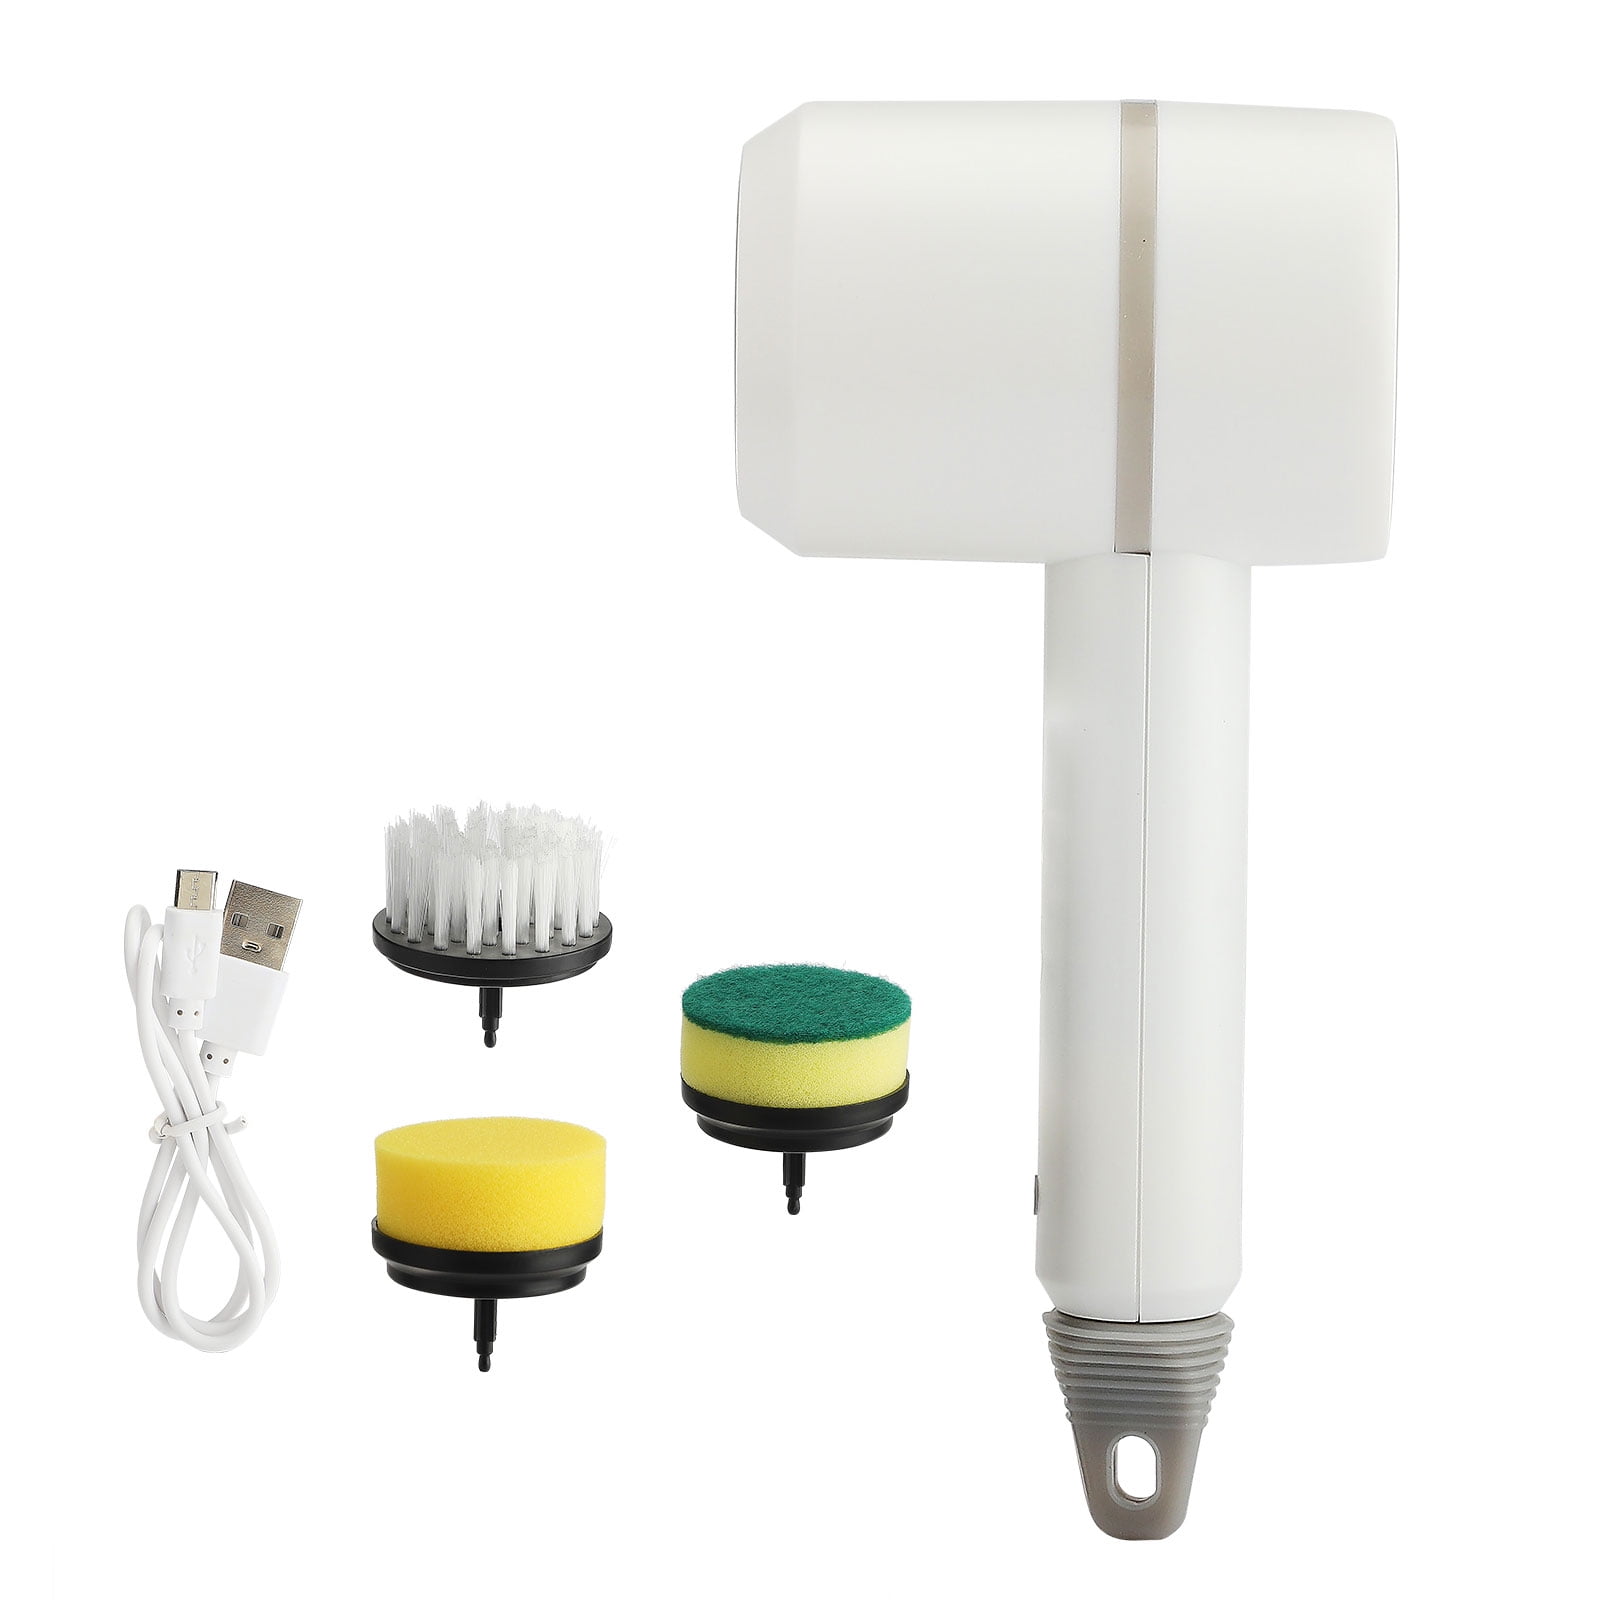 5 in 1 Electric Cleaning Brush - DynaBrush